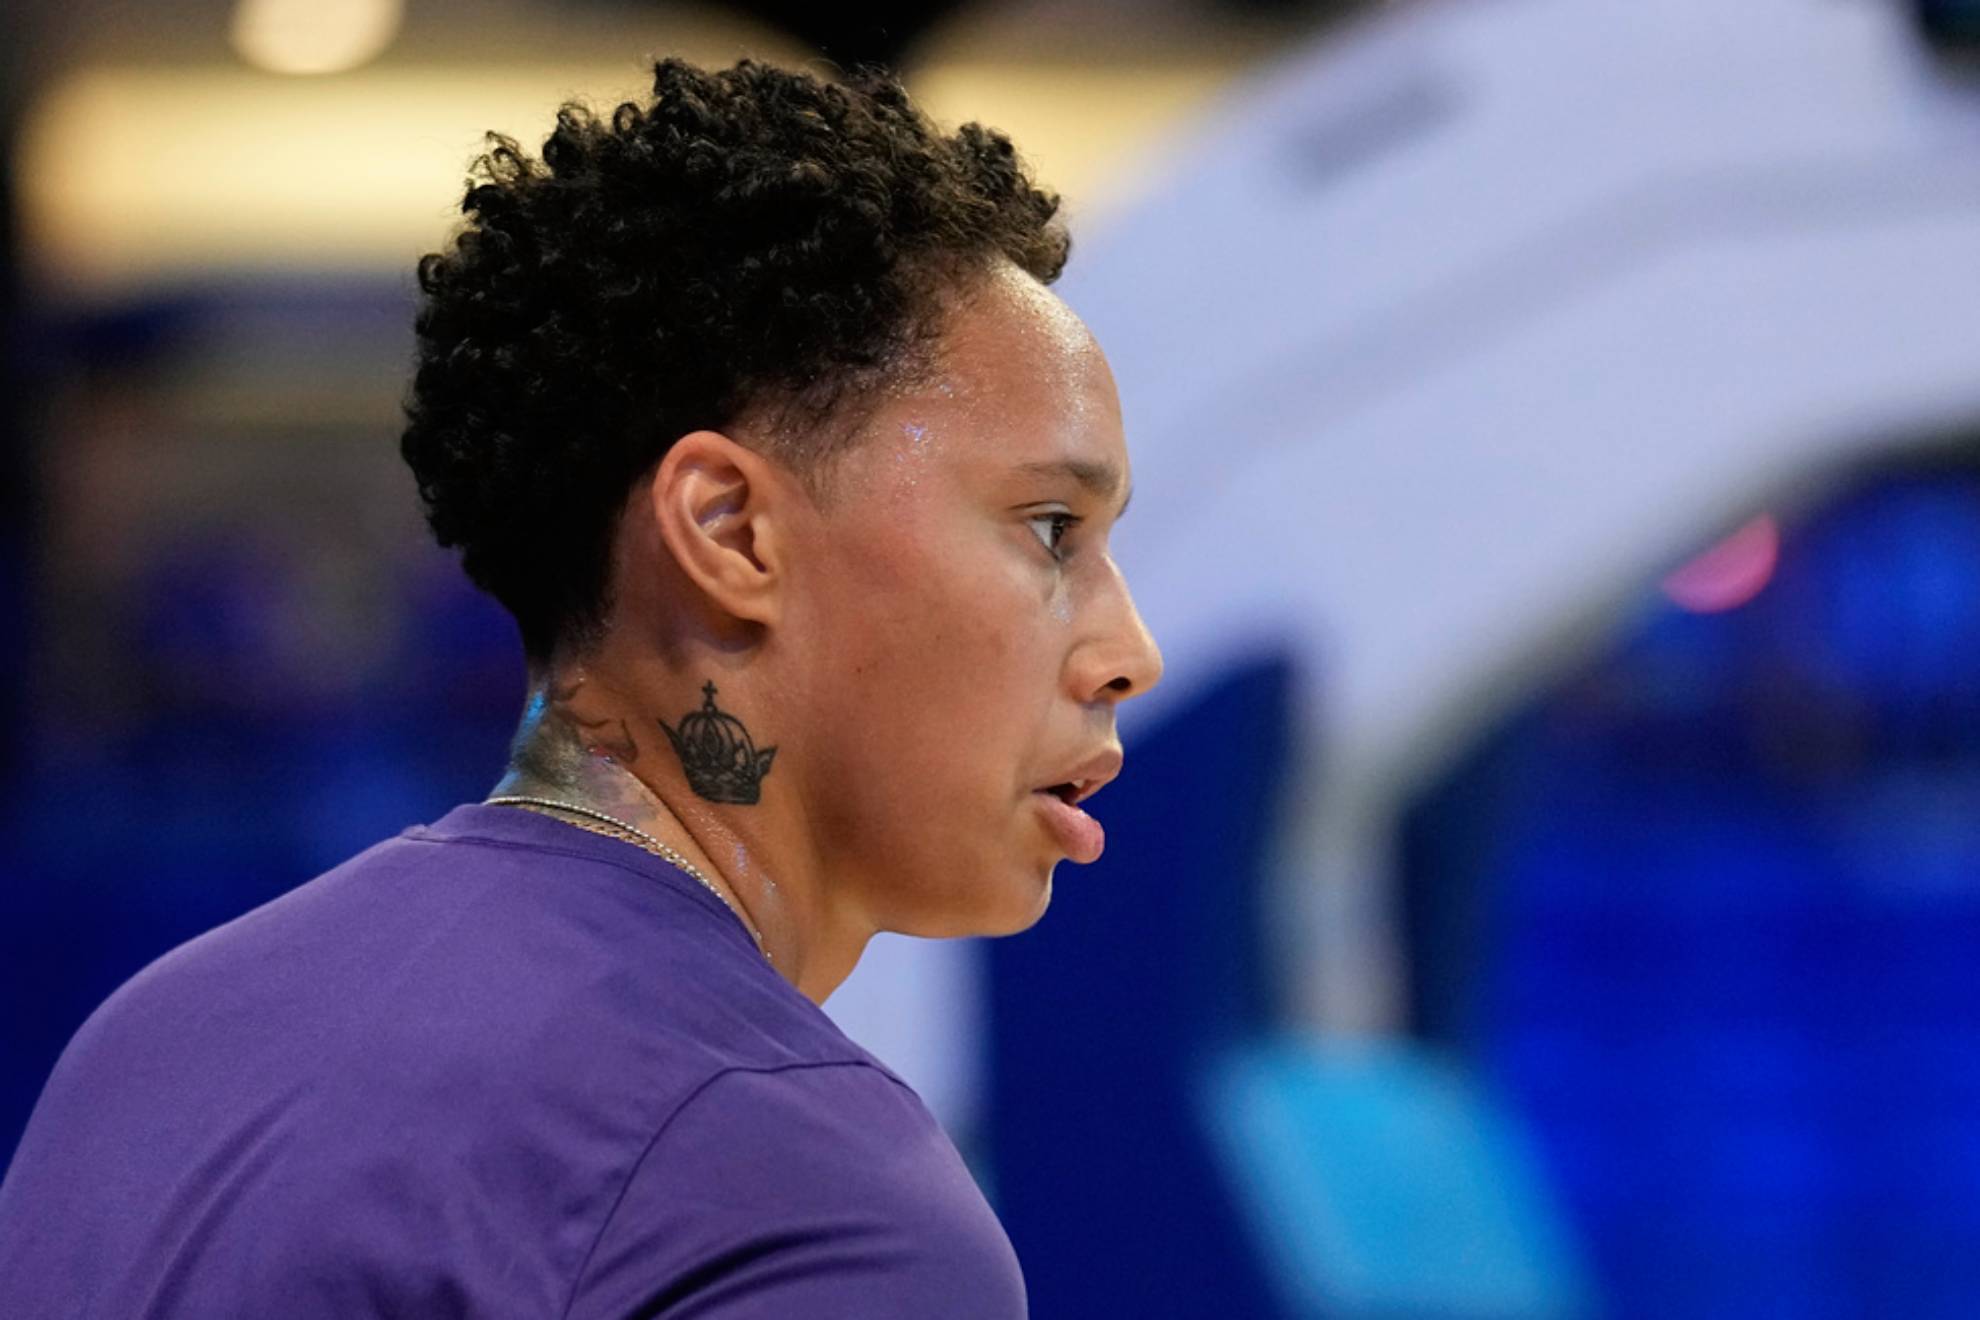 Brittney Griner prepares for the team's WNBA basketball game against the Dallas Wings